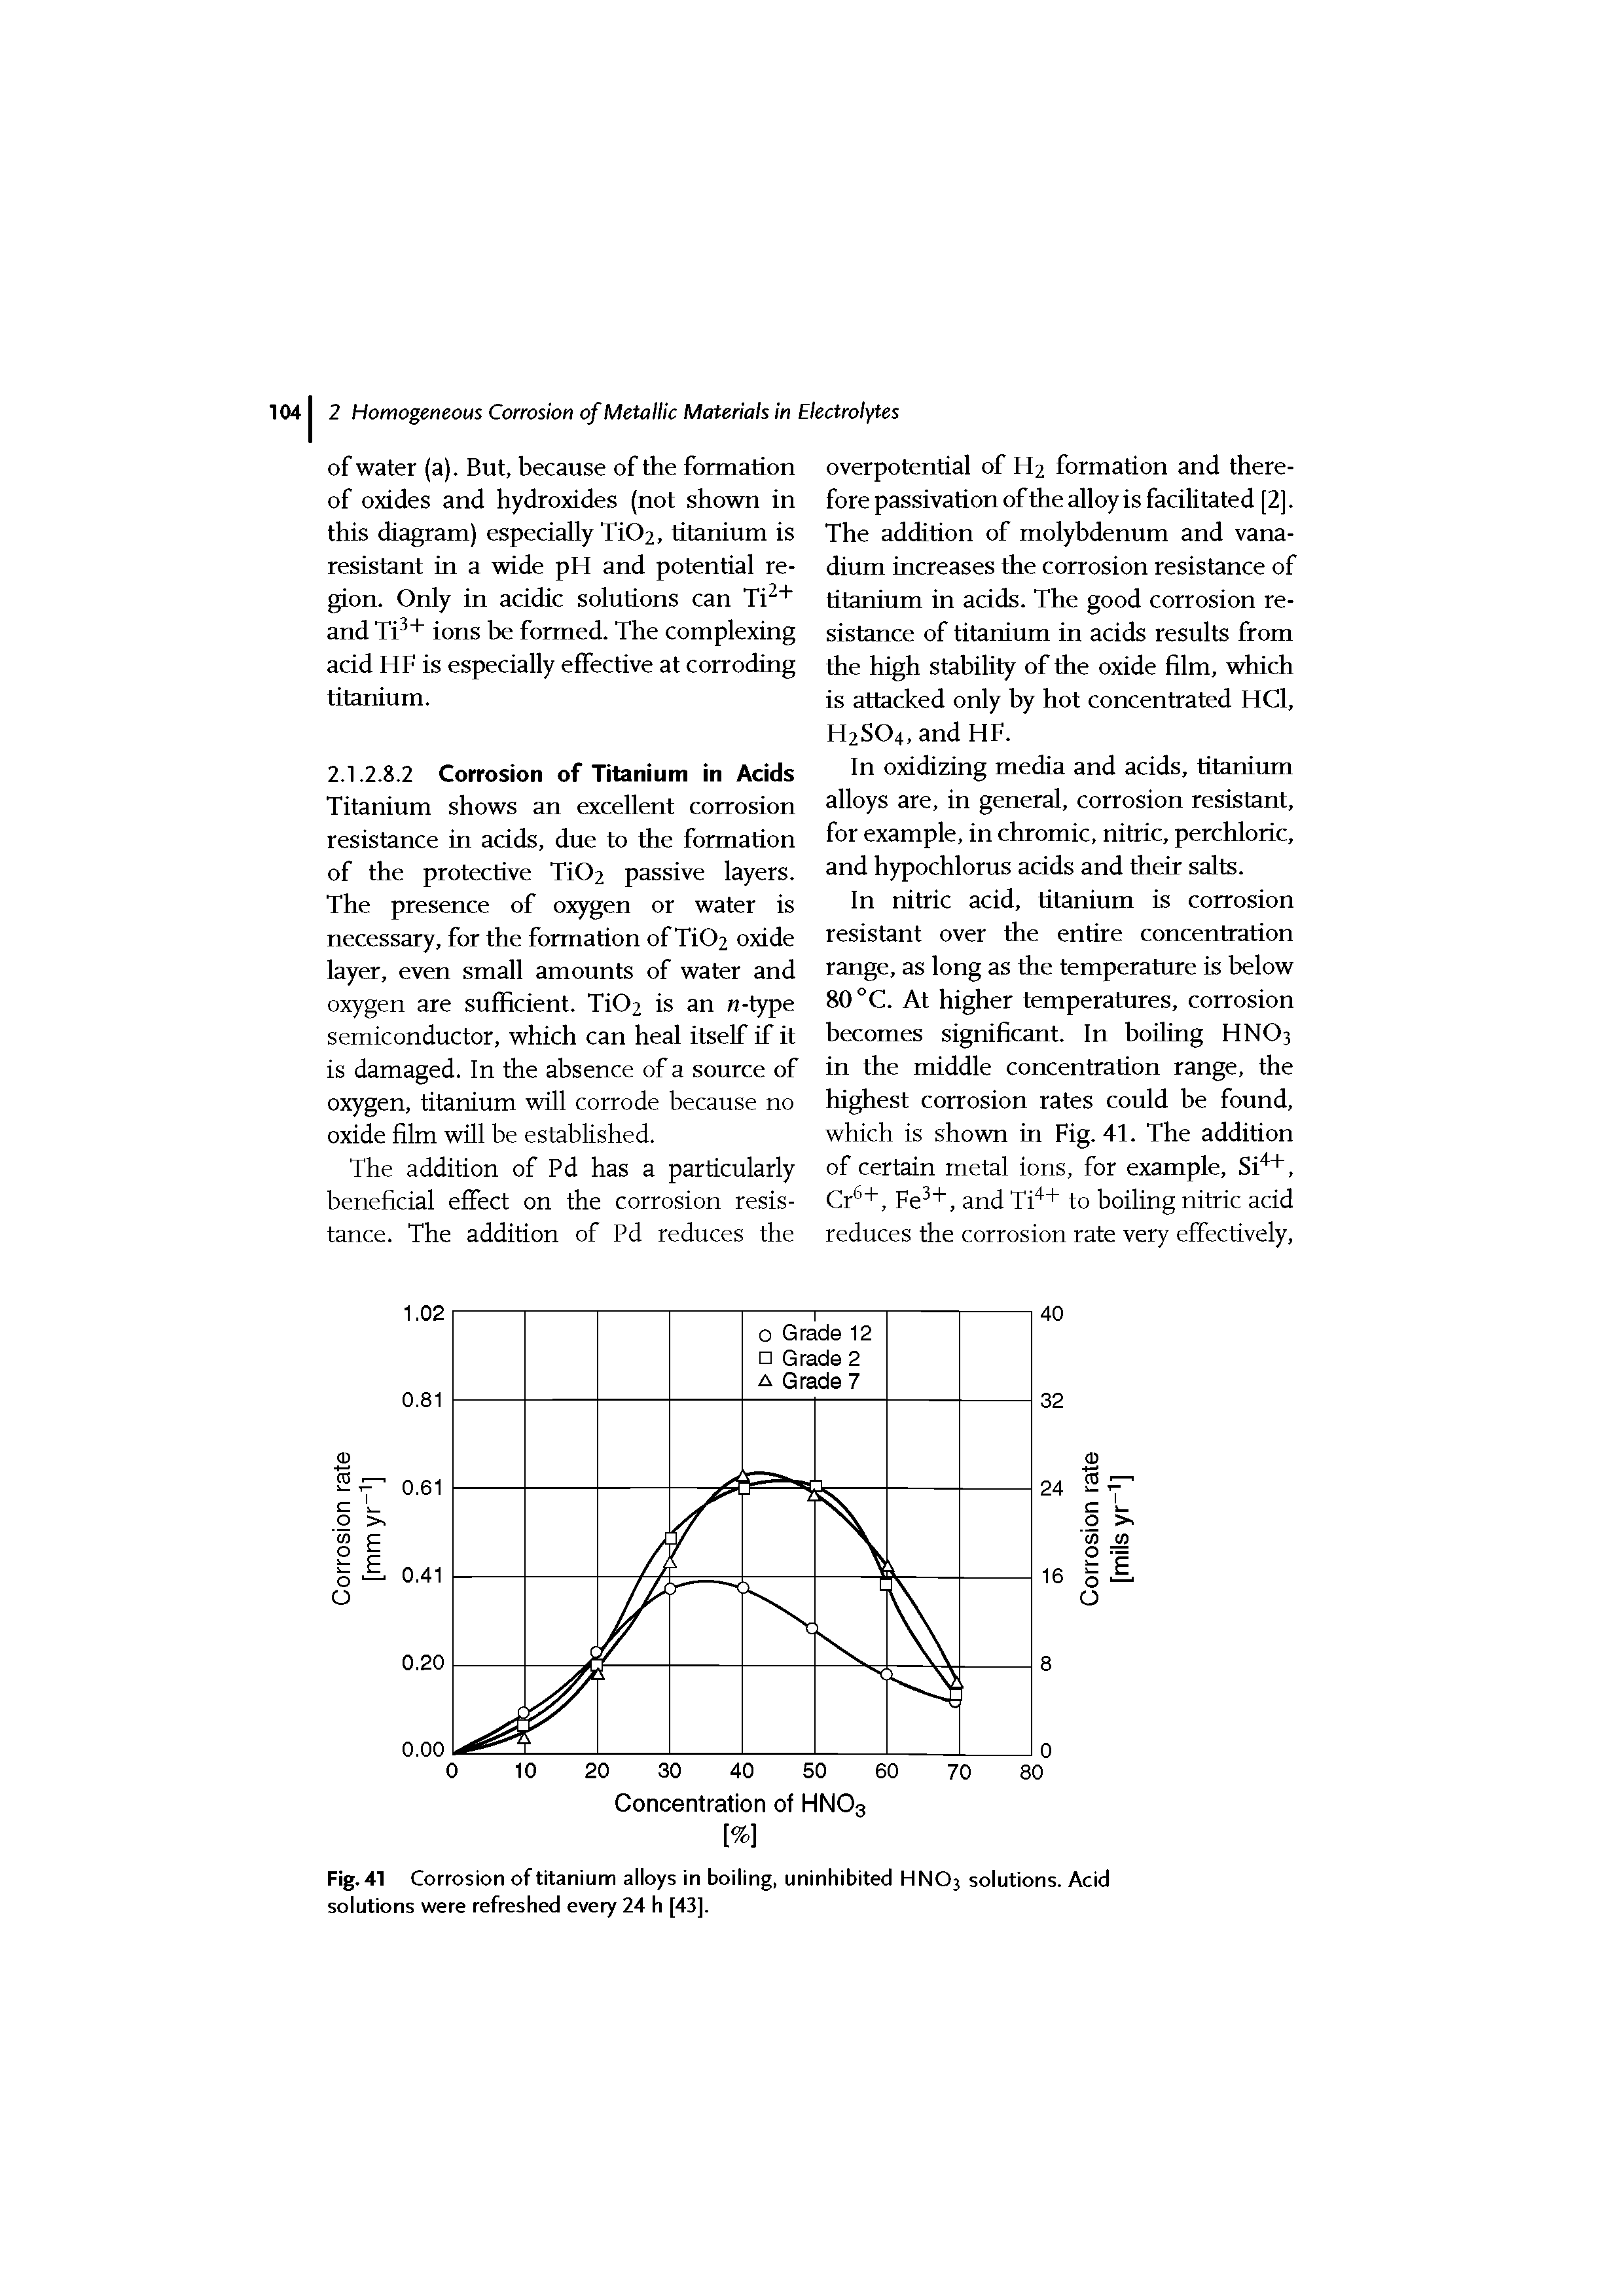 Fig. 41 Corrosion of titanium alloys in boiling, uninhibited HNO3 solutions. Acid solutions were refreshed every 24 h [43].